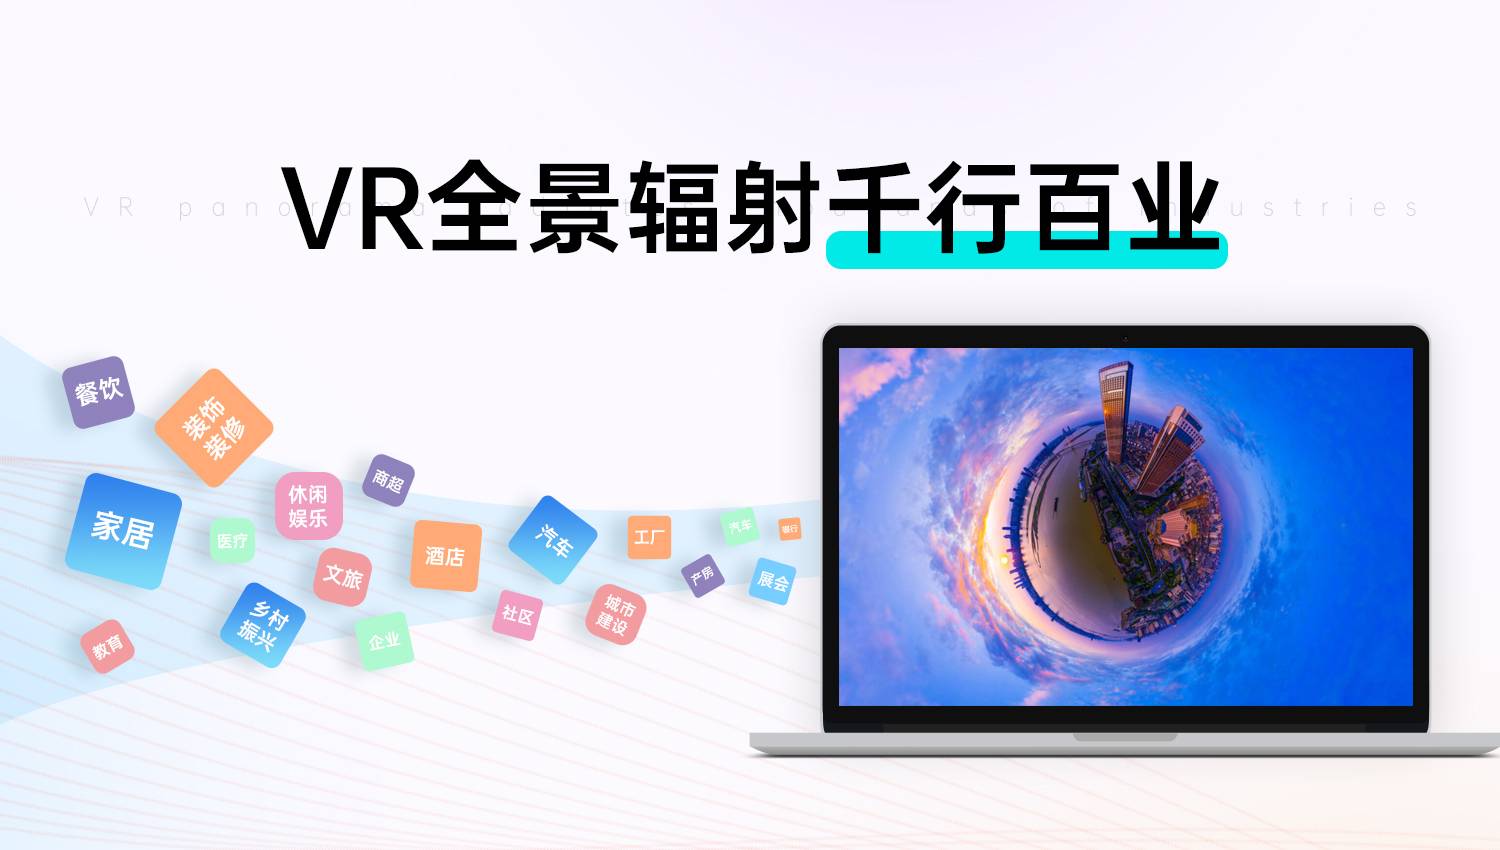 What are the functions of VR panoramic display?  What fields is it suitable for?